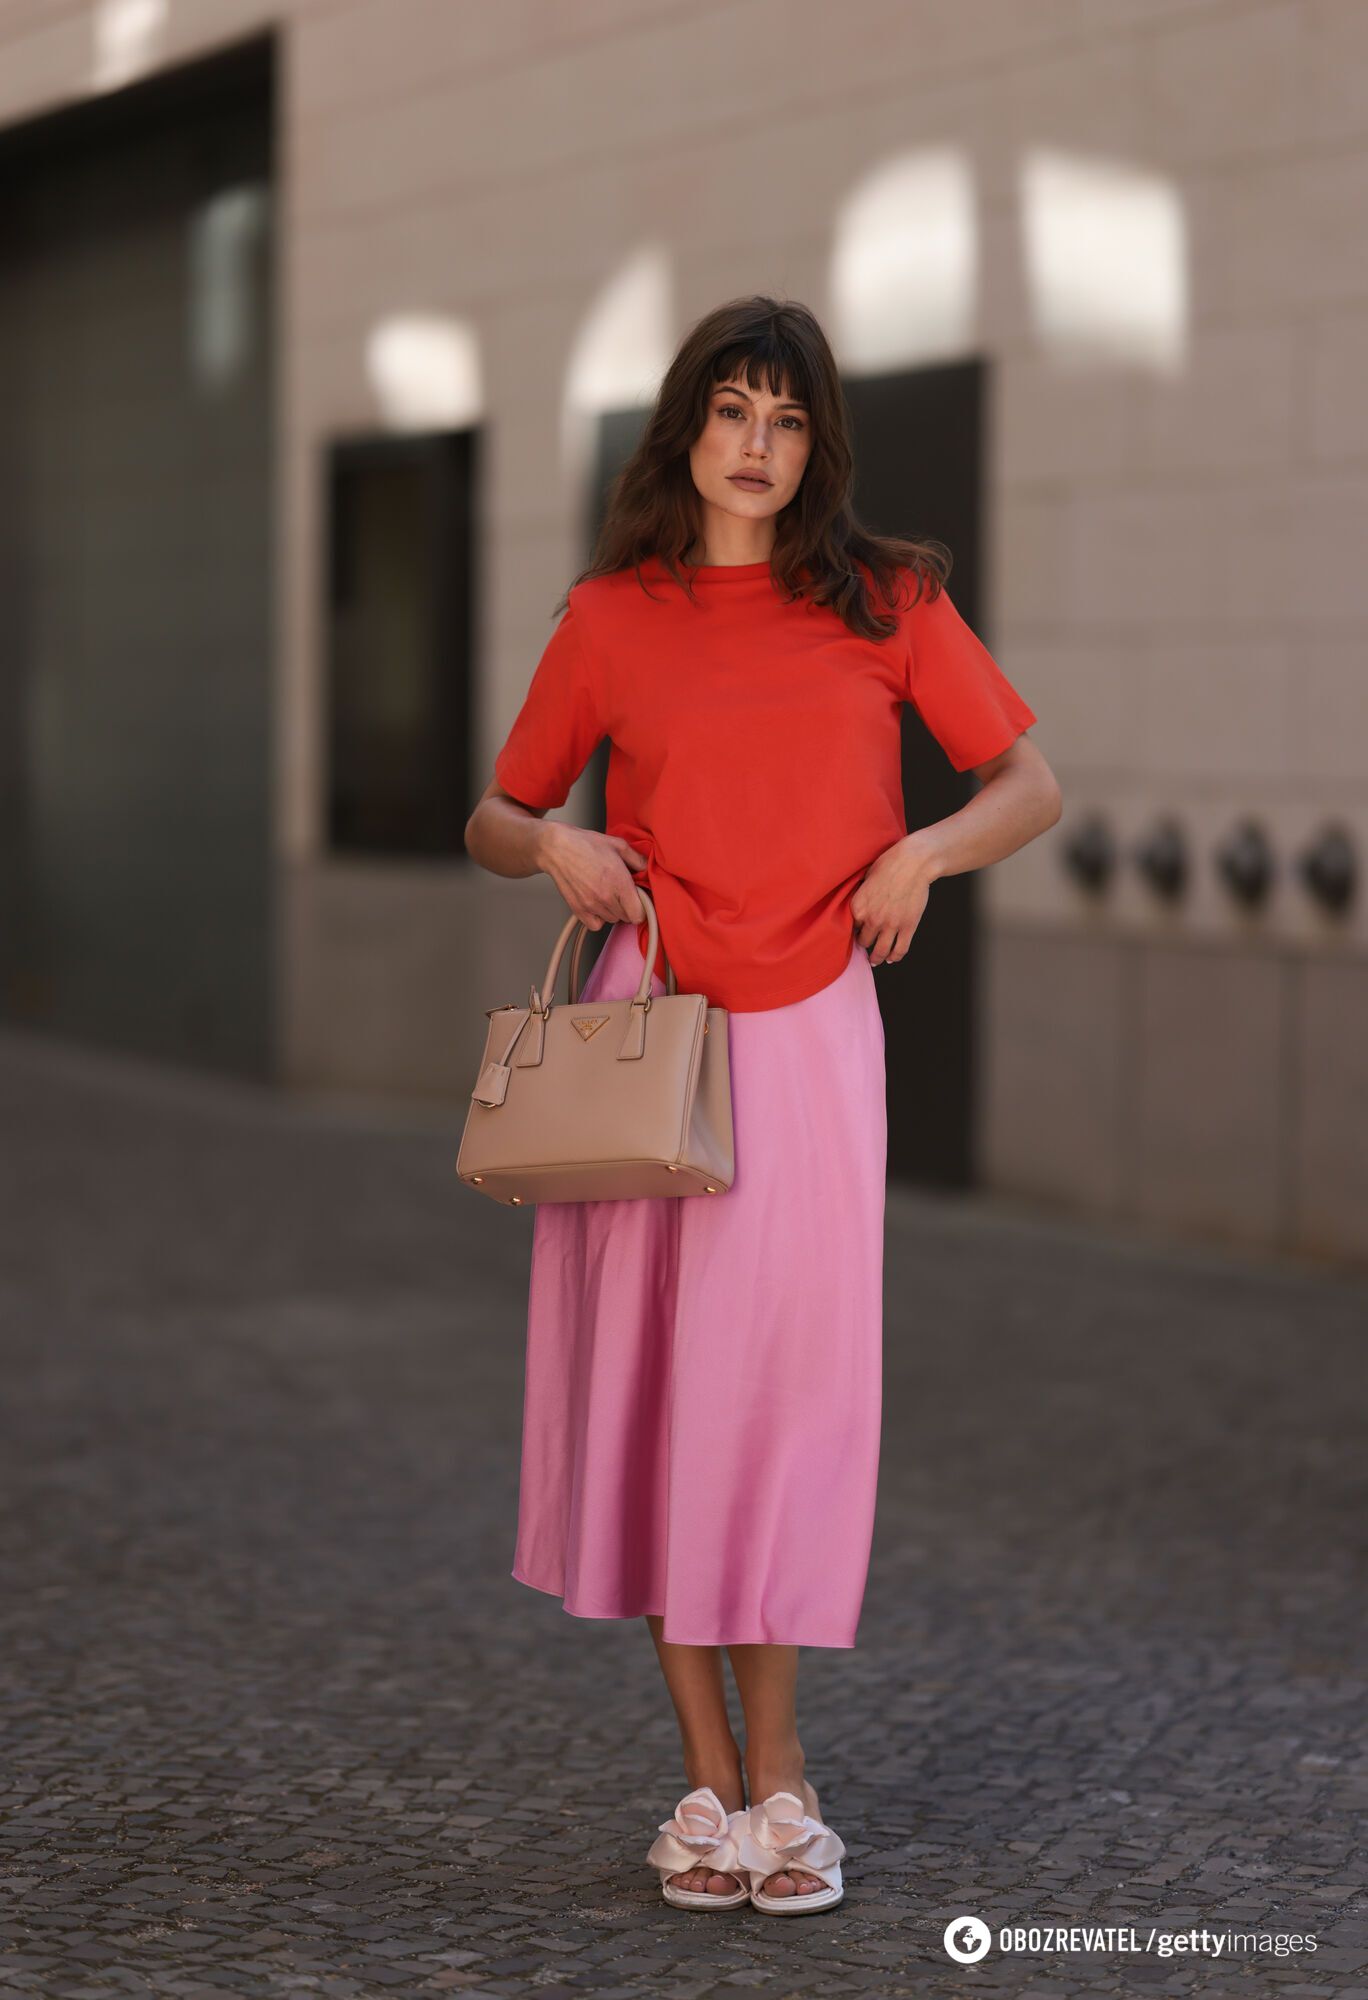 What to wear with midi skirts: 5 stylish combinations that add lightness to the look